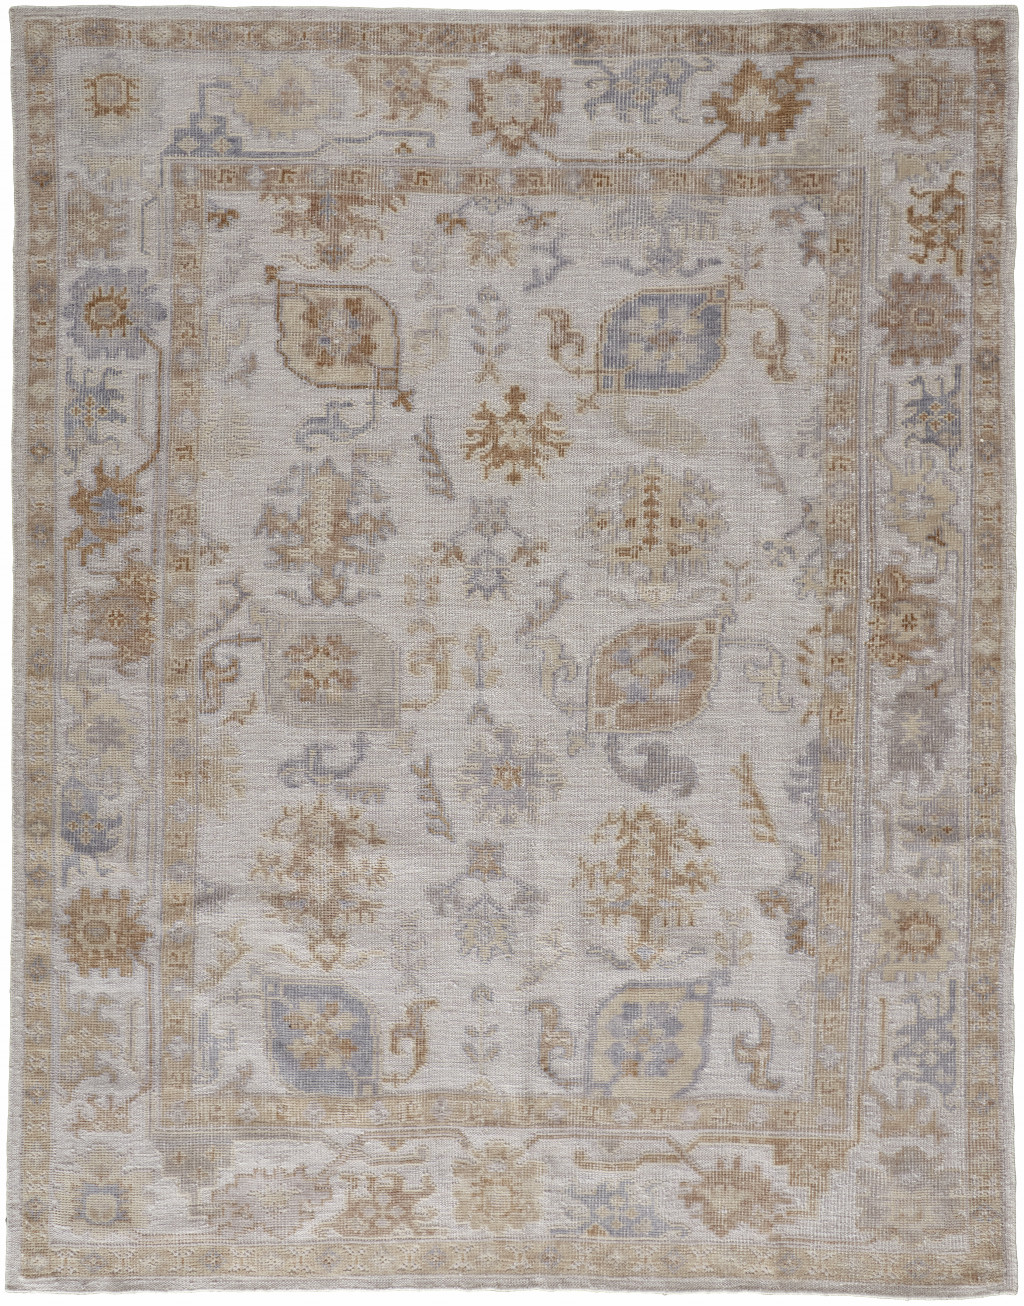 5' X 8' Ivory And Tan Floral Hand Knotted Stain Resistant Area Rug-514978-1